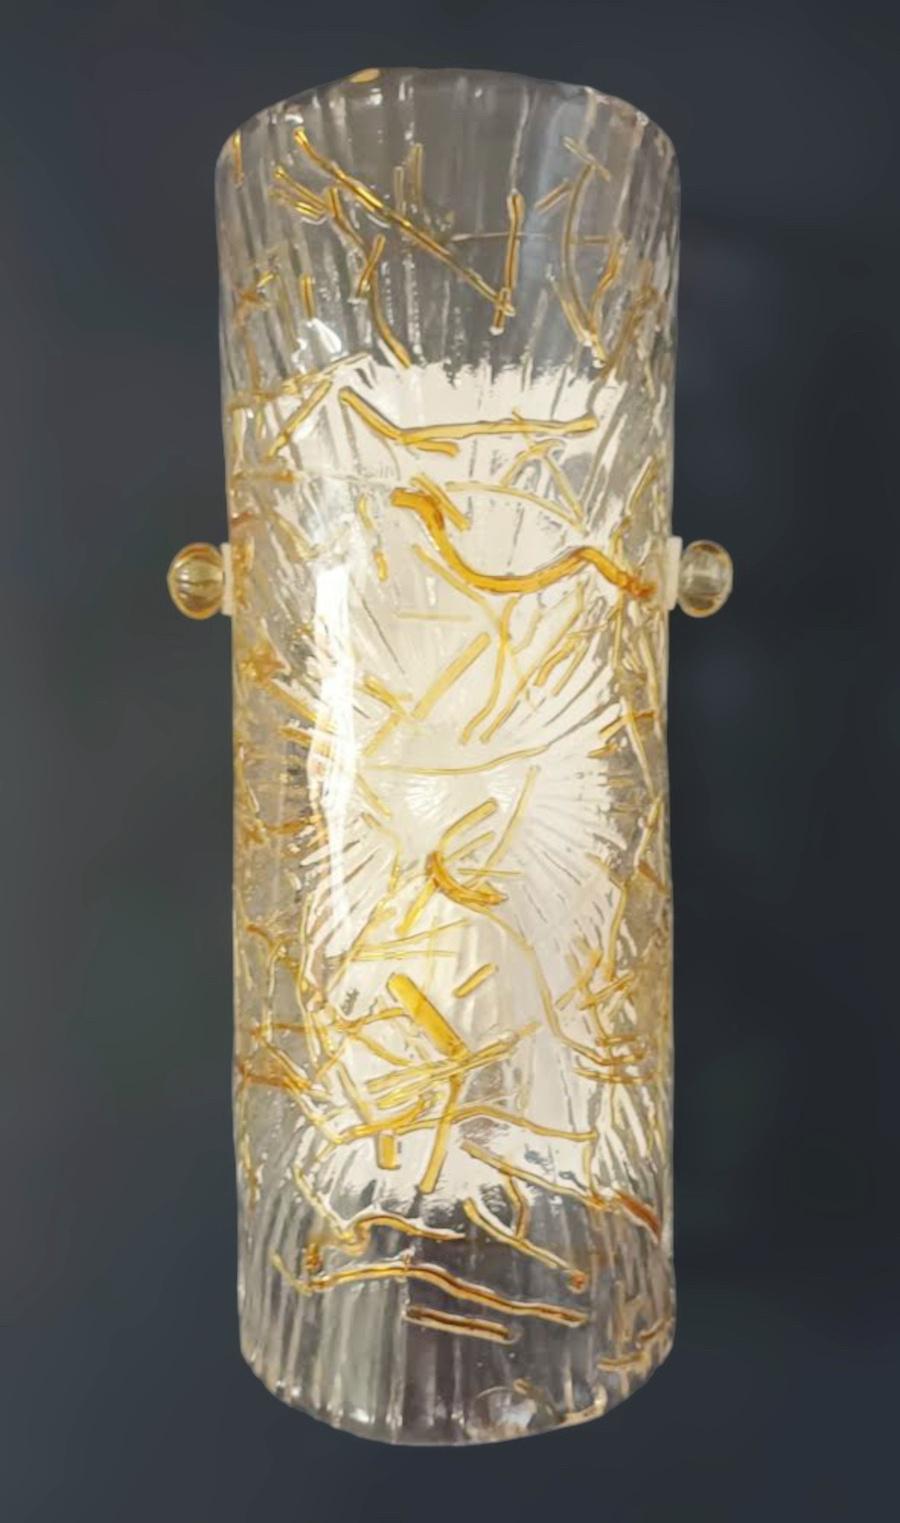 Italian wall light with a cylinder Murano glass shade in clear color with amber and gold texture, mounted on white metal frame / Made in Italy by Mazzega circa 1970s
Measures: Height 12 inches, width 6 inches, depth 3.5 inches
1 light / E12 or E14